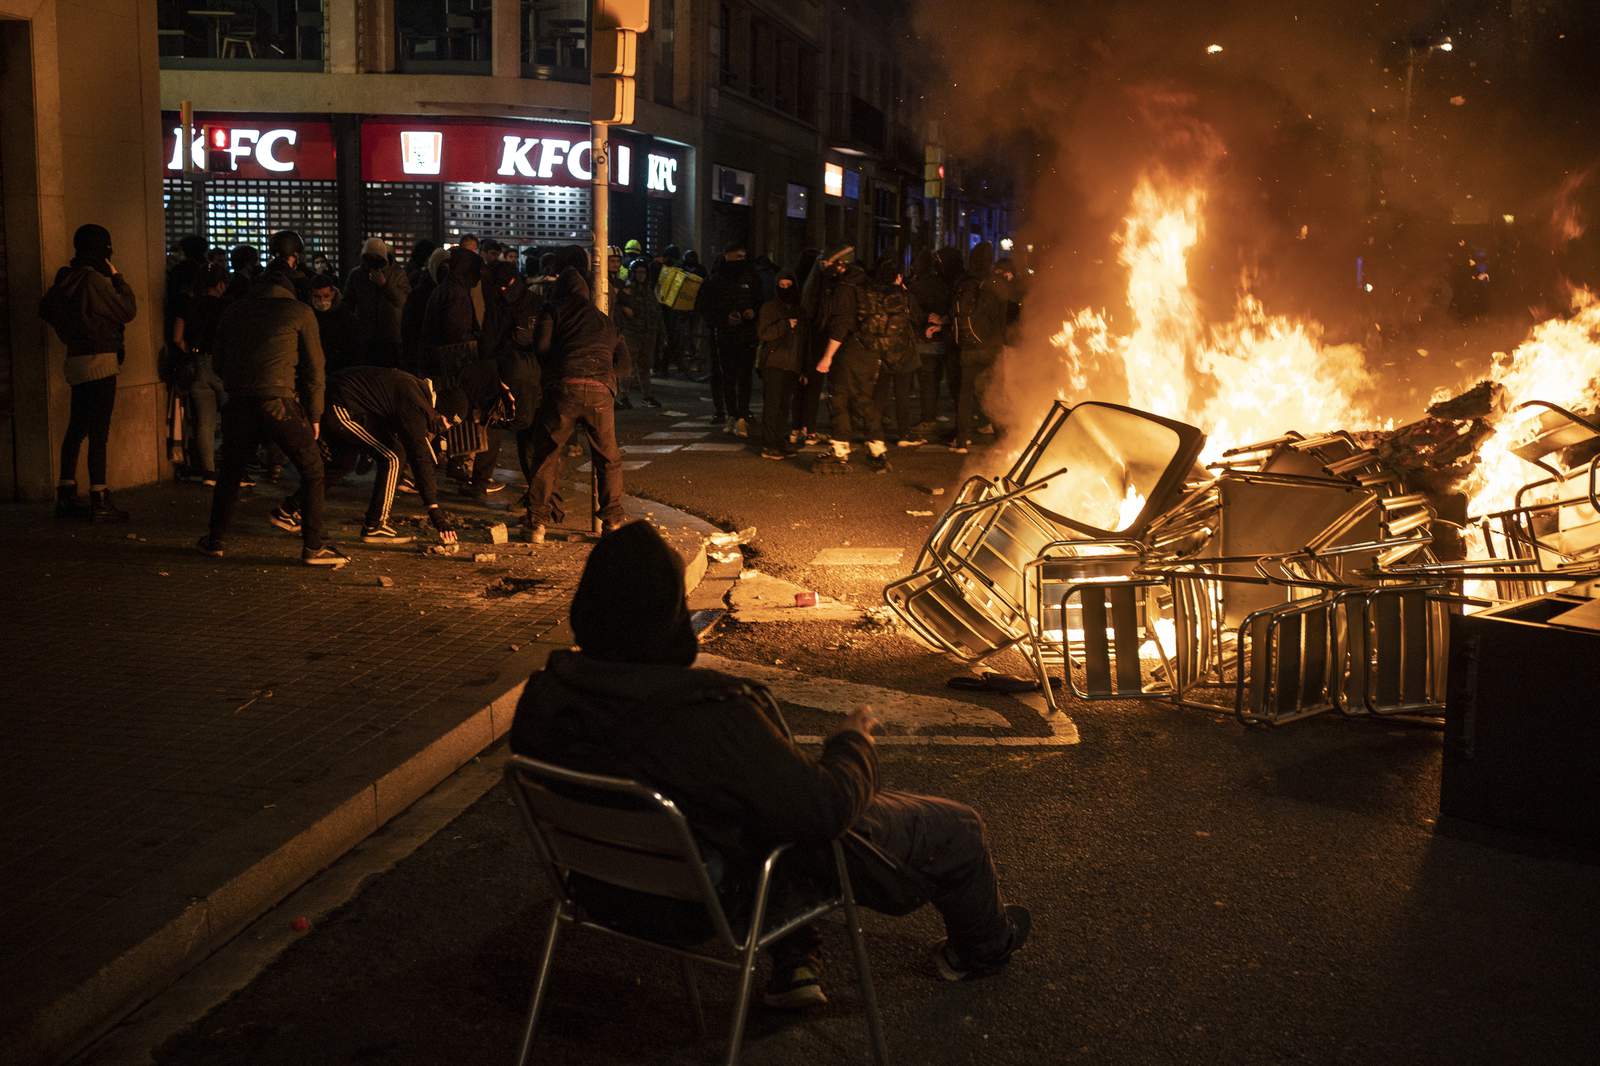 Spain sees 4th night of riots as government shows strain